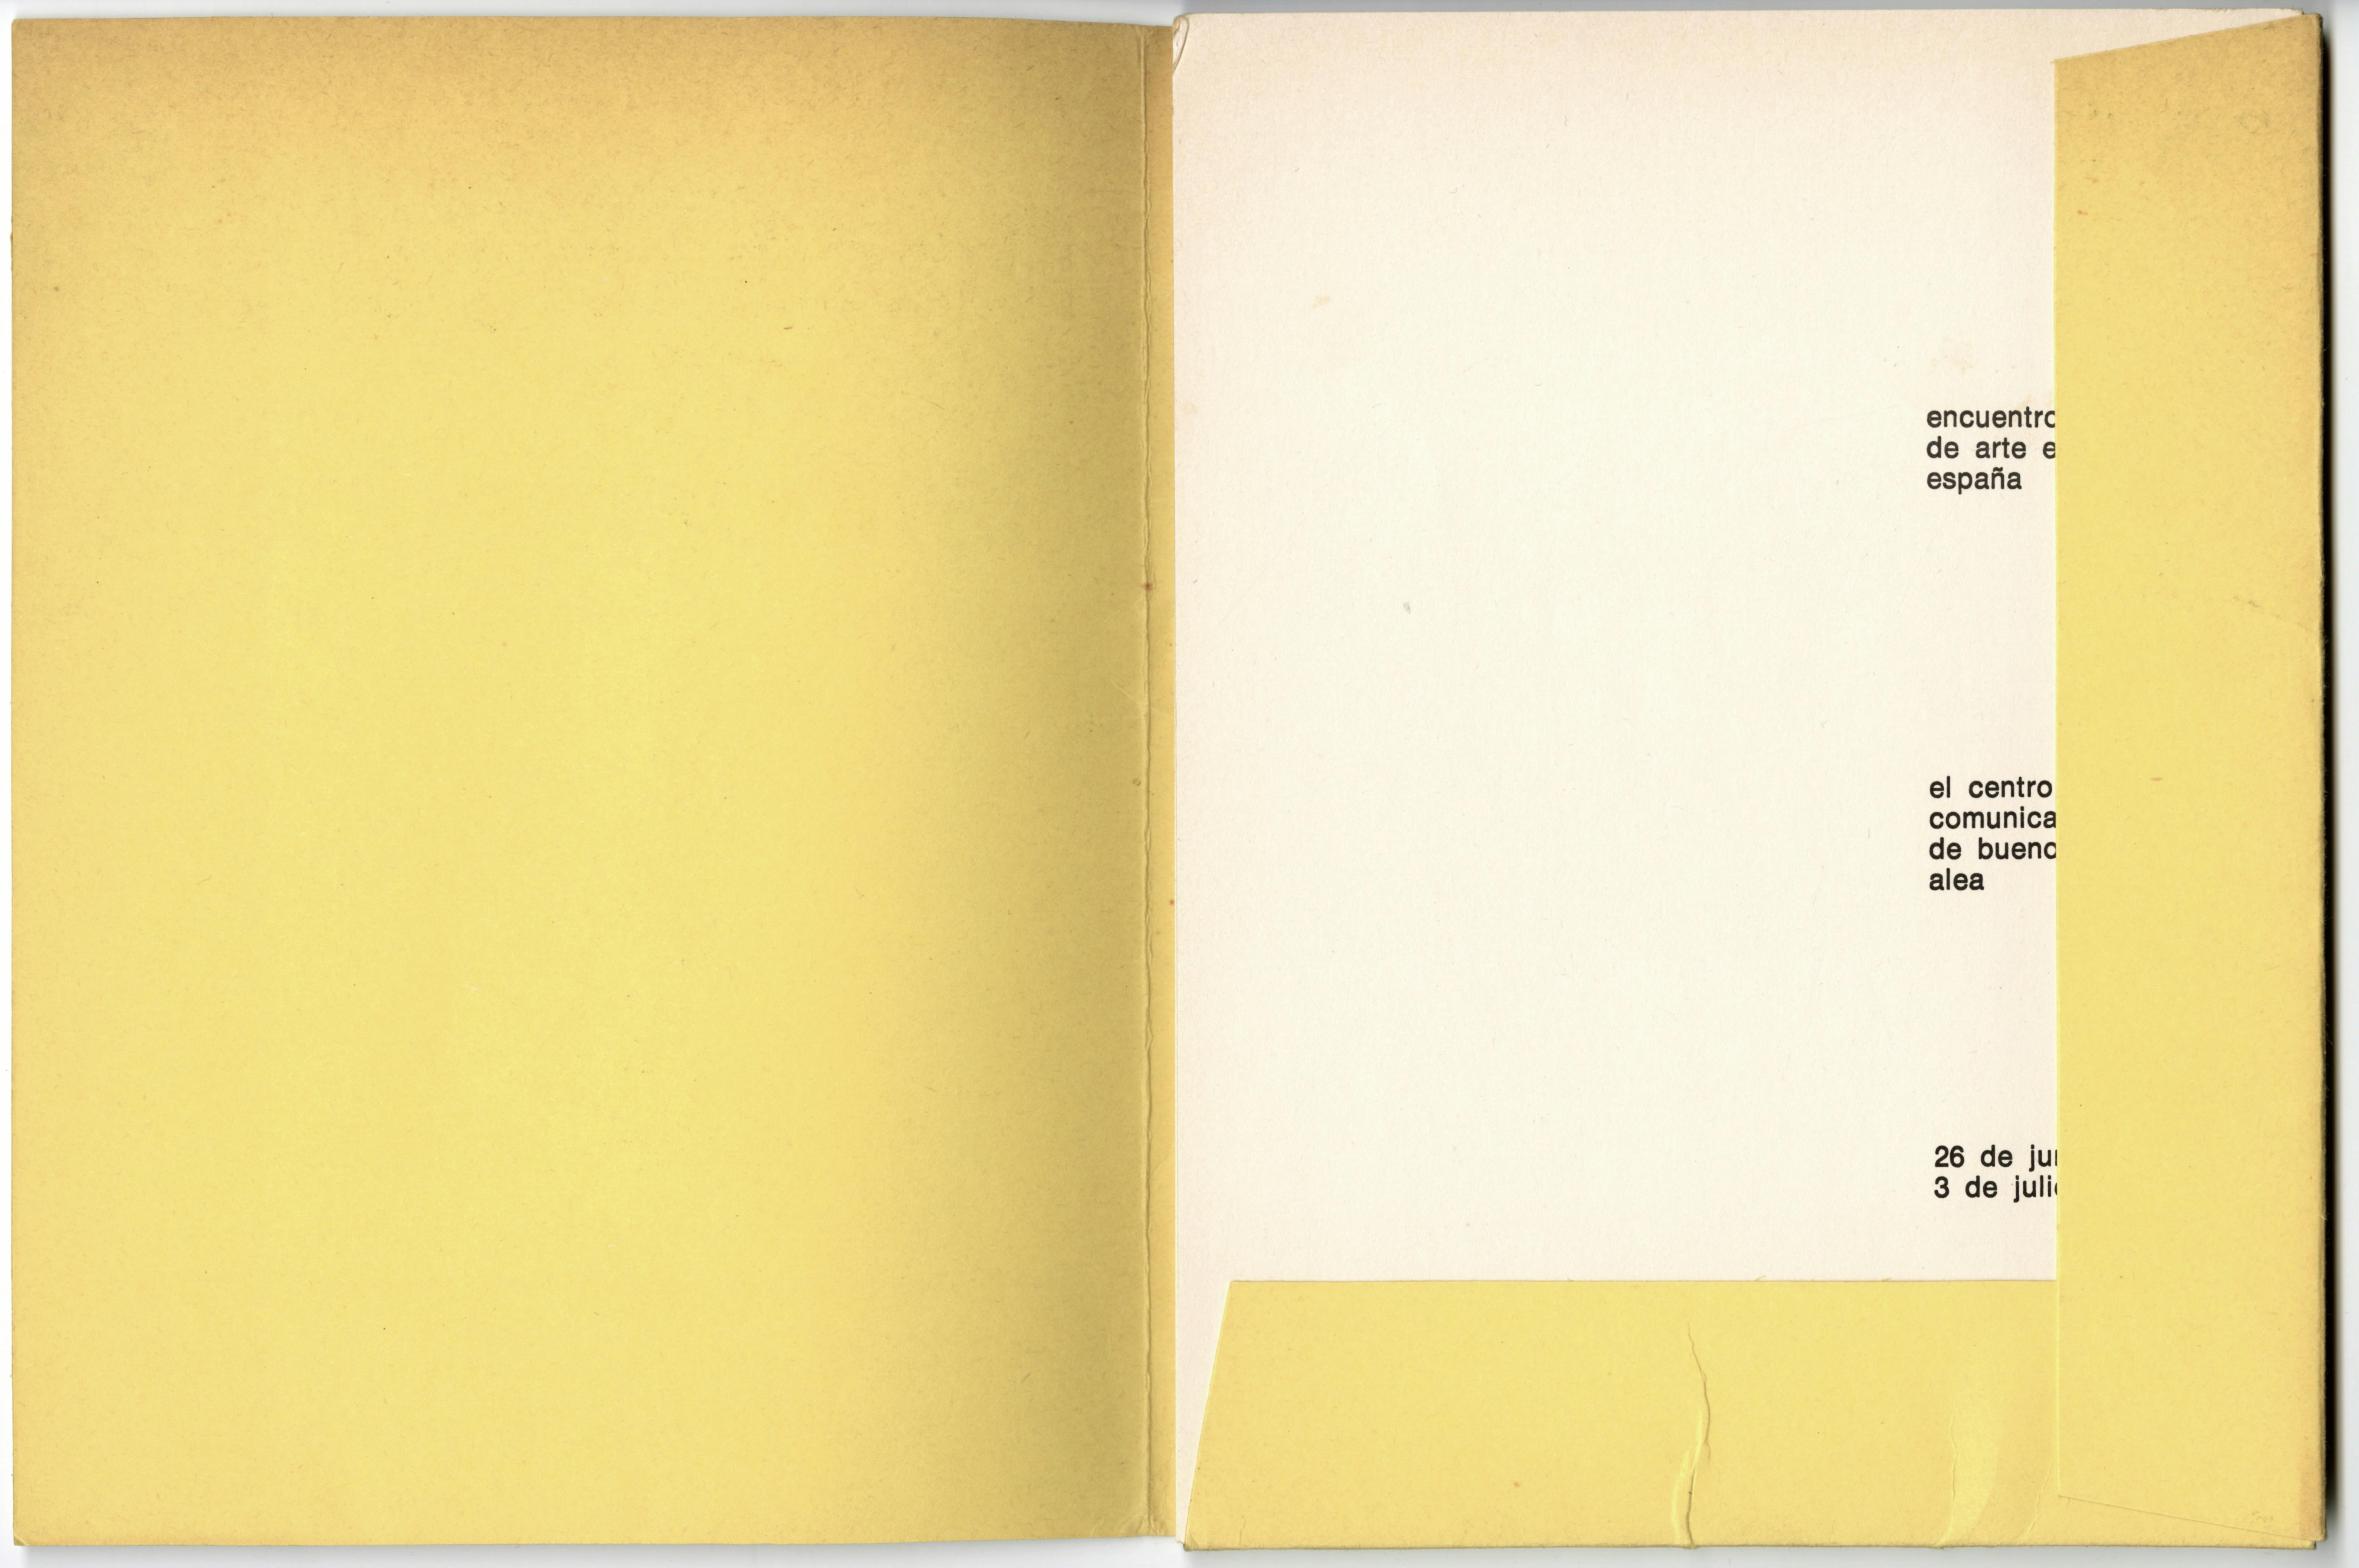 A book with a yellow jacket, opened such that the first page is visible beneath flaps on the right and lower edges of the book. Partially obscured by the jacket are the book’s title, publisher, and exhibition dates.